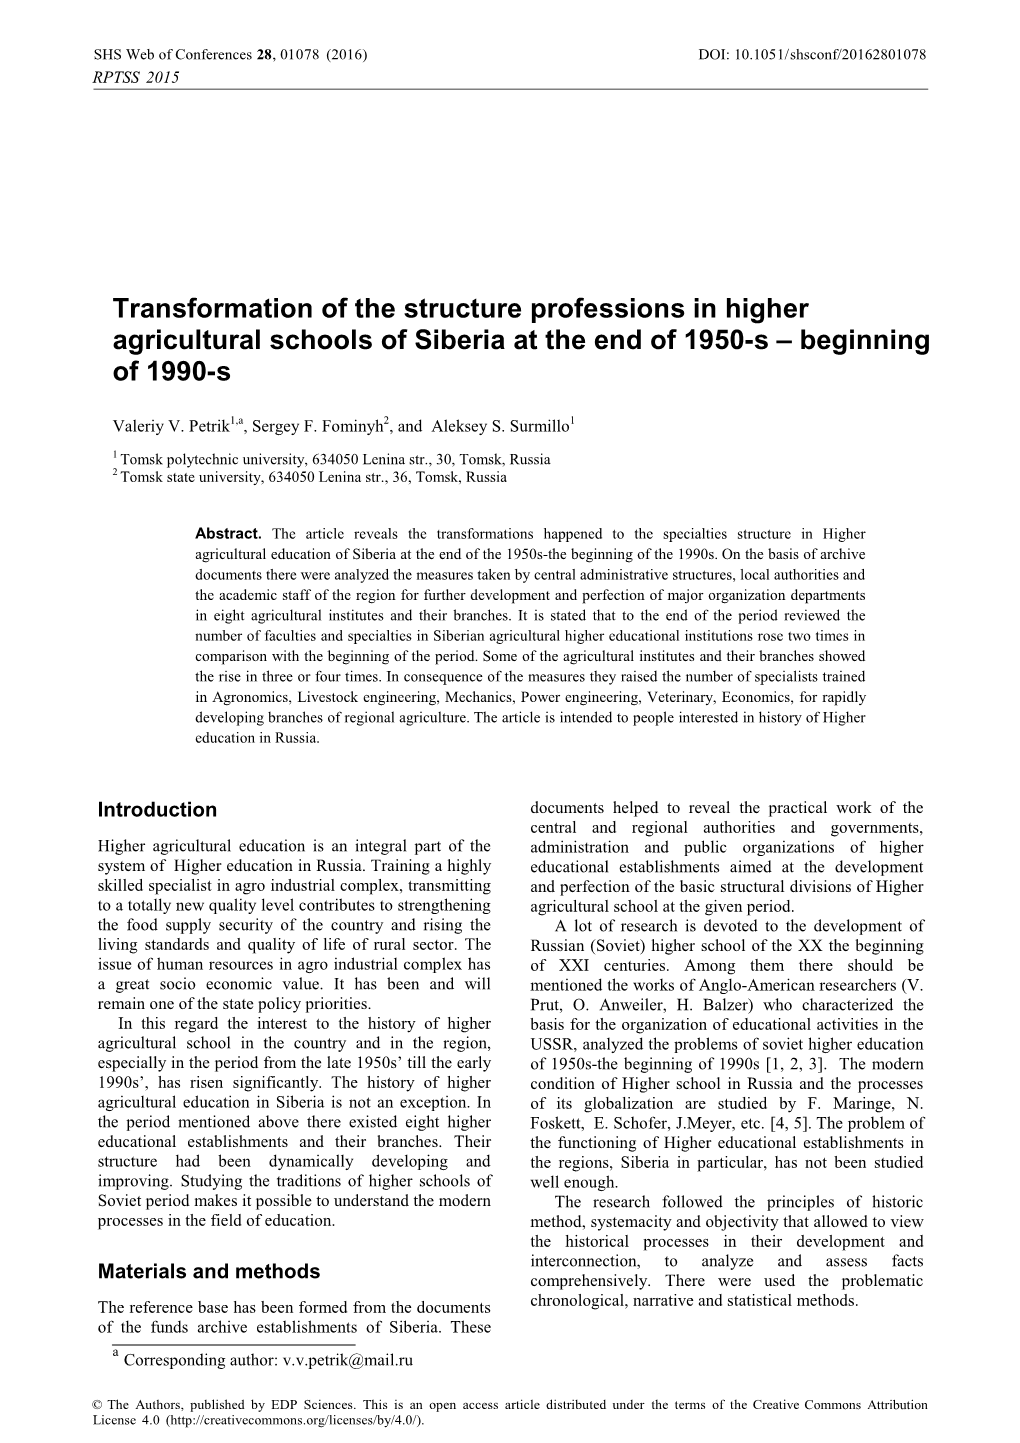 Transformation of the Structure Professions in Higher Agricultural Schools of Siberia at the End of 1950-S – Beginning of 1990-S